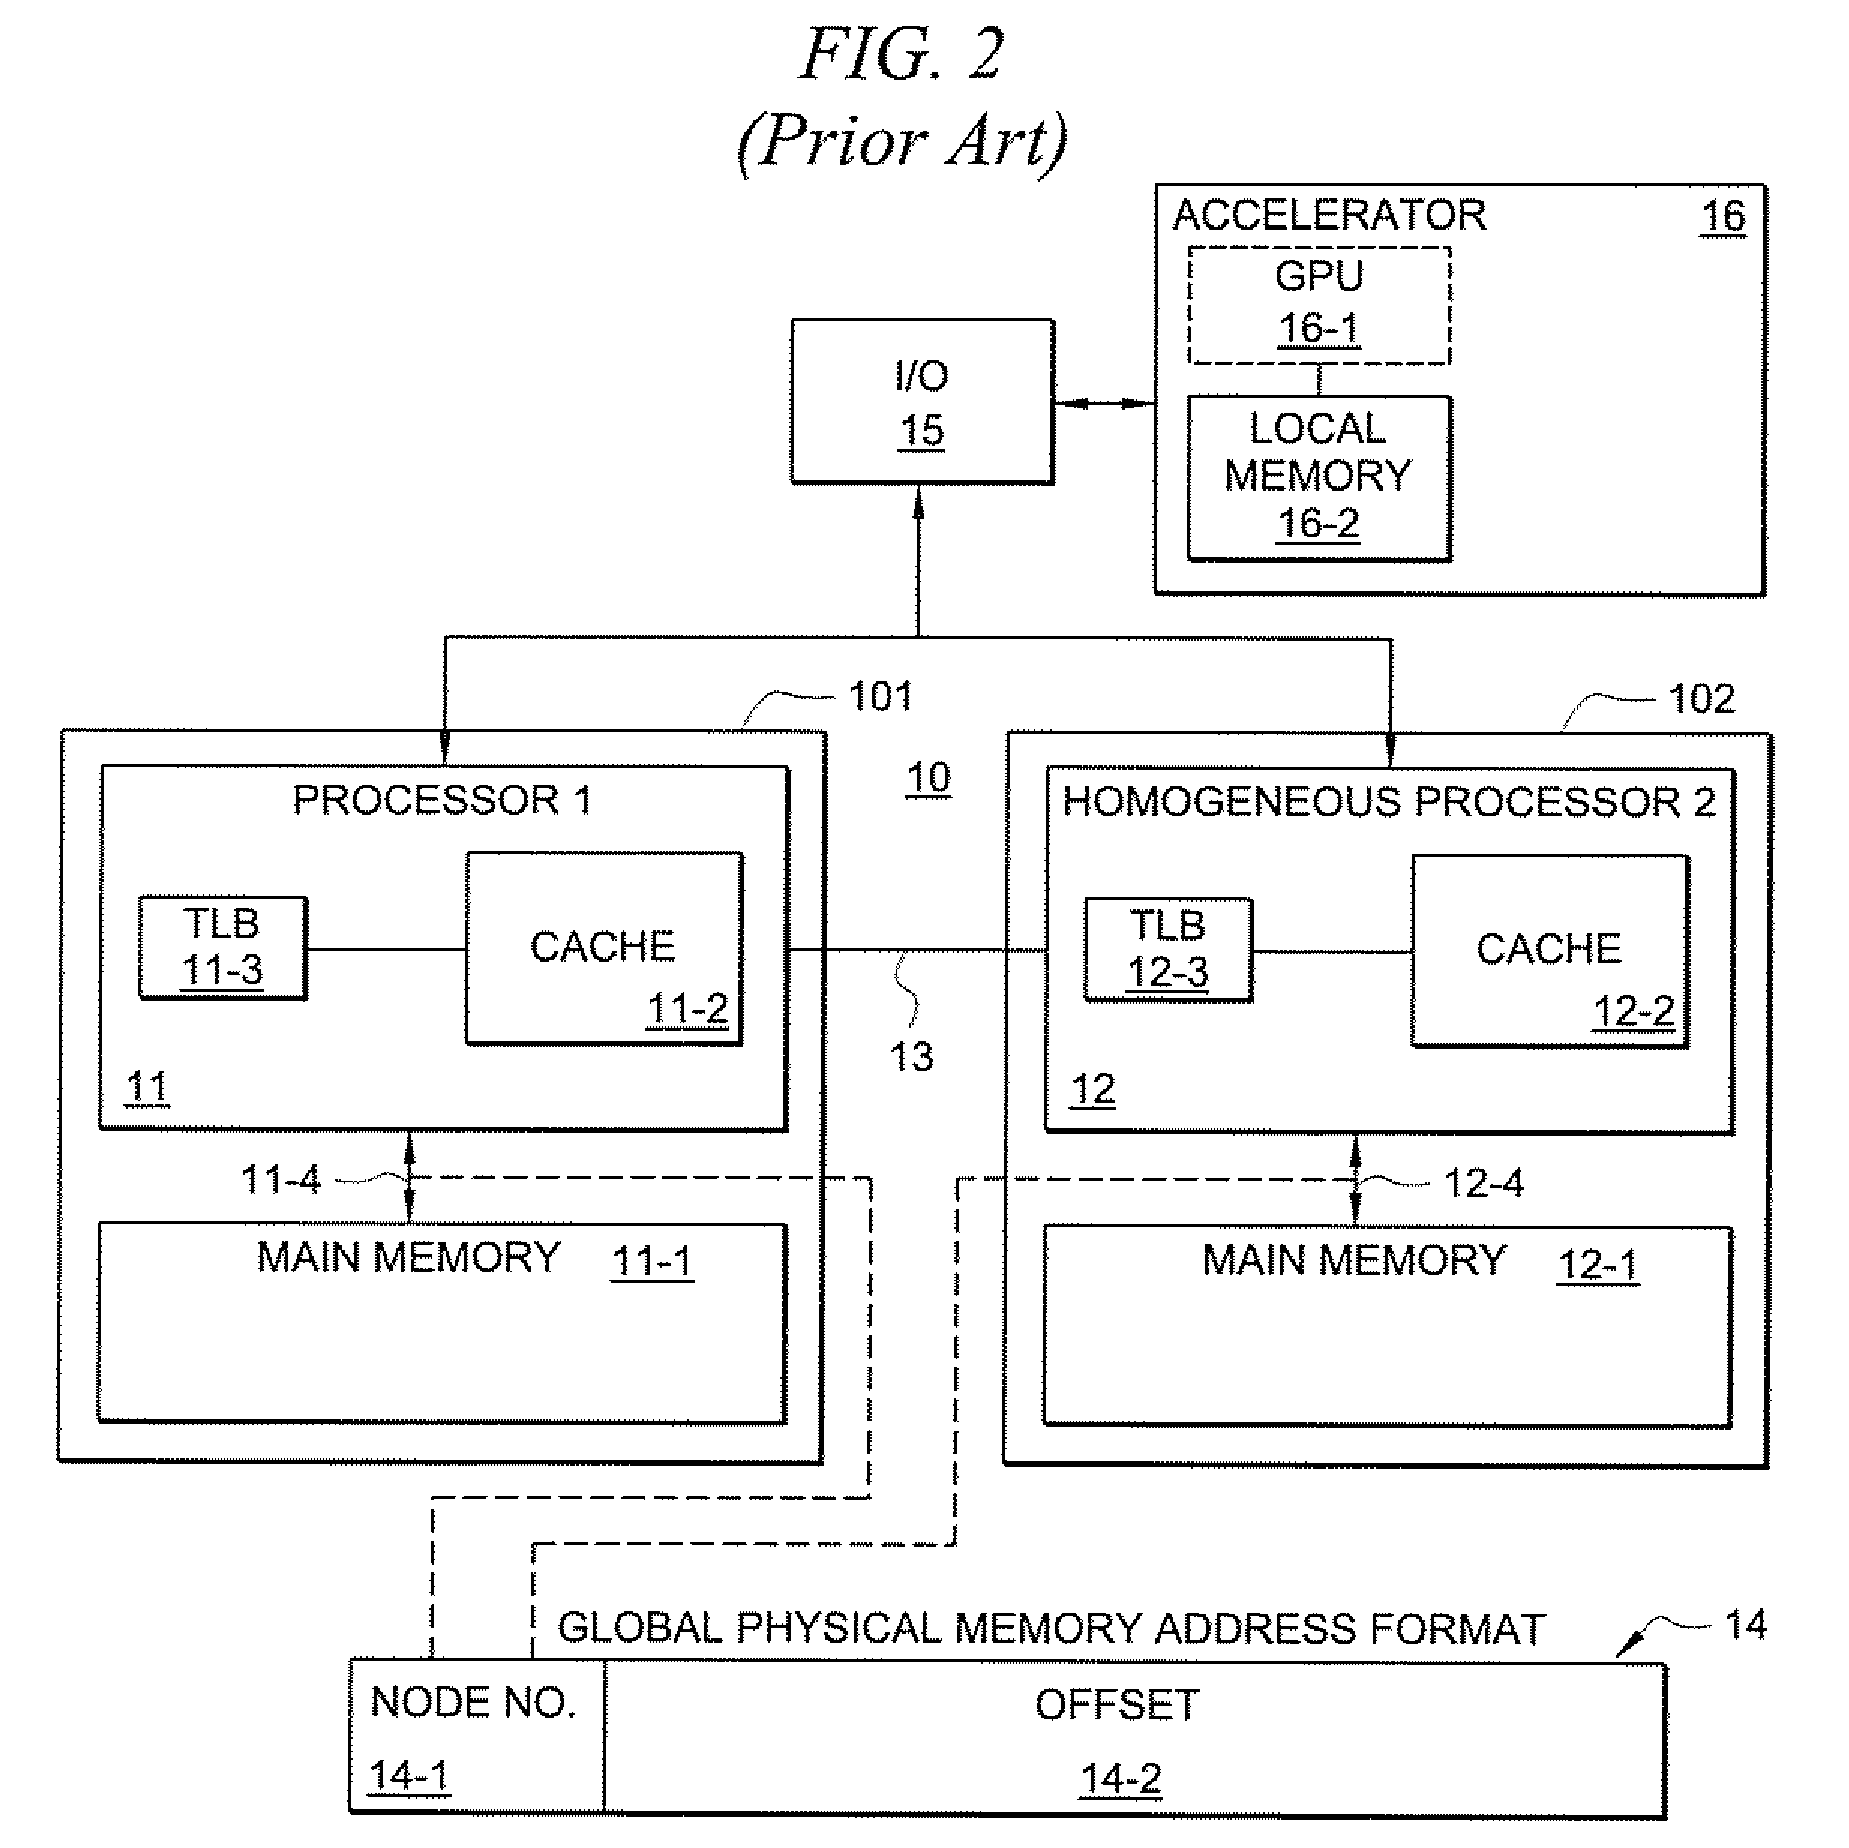 Compiler for generating an executable comprising instructions for a plurality of different instruction sets